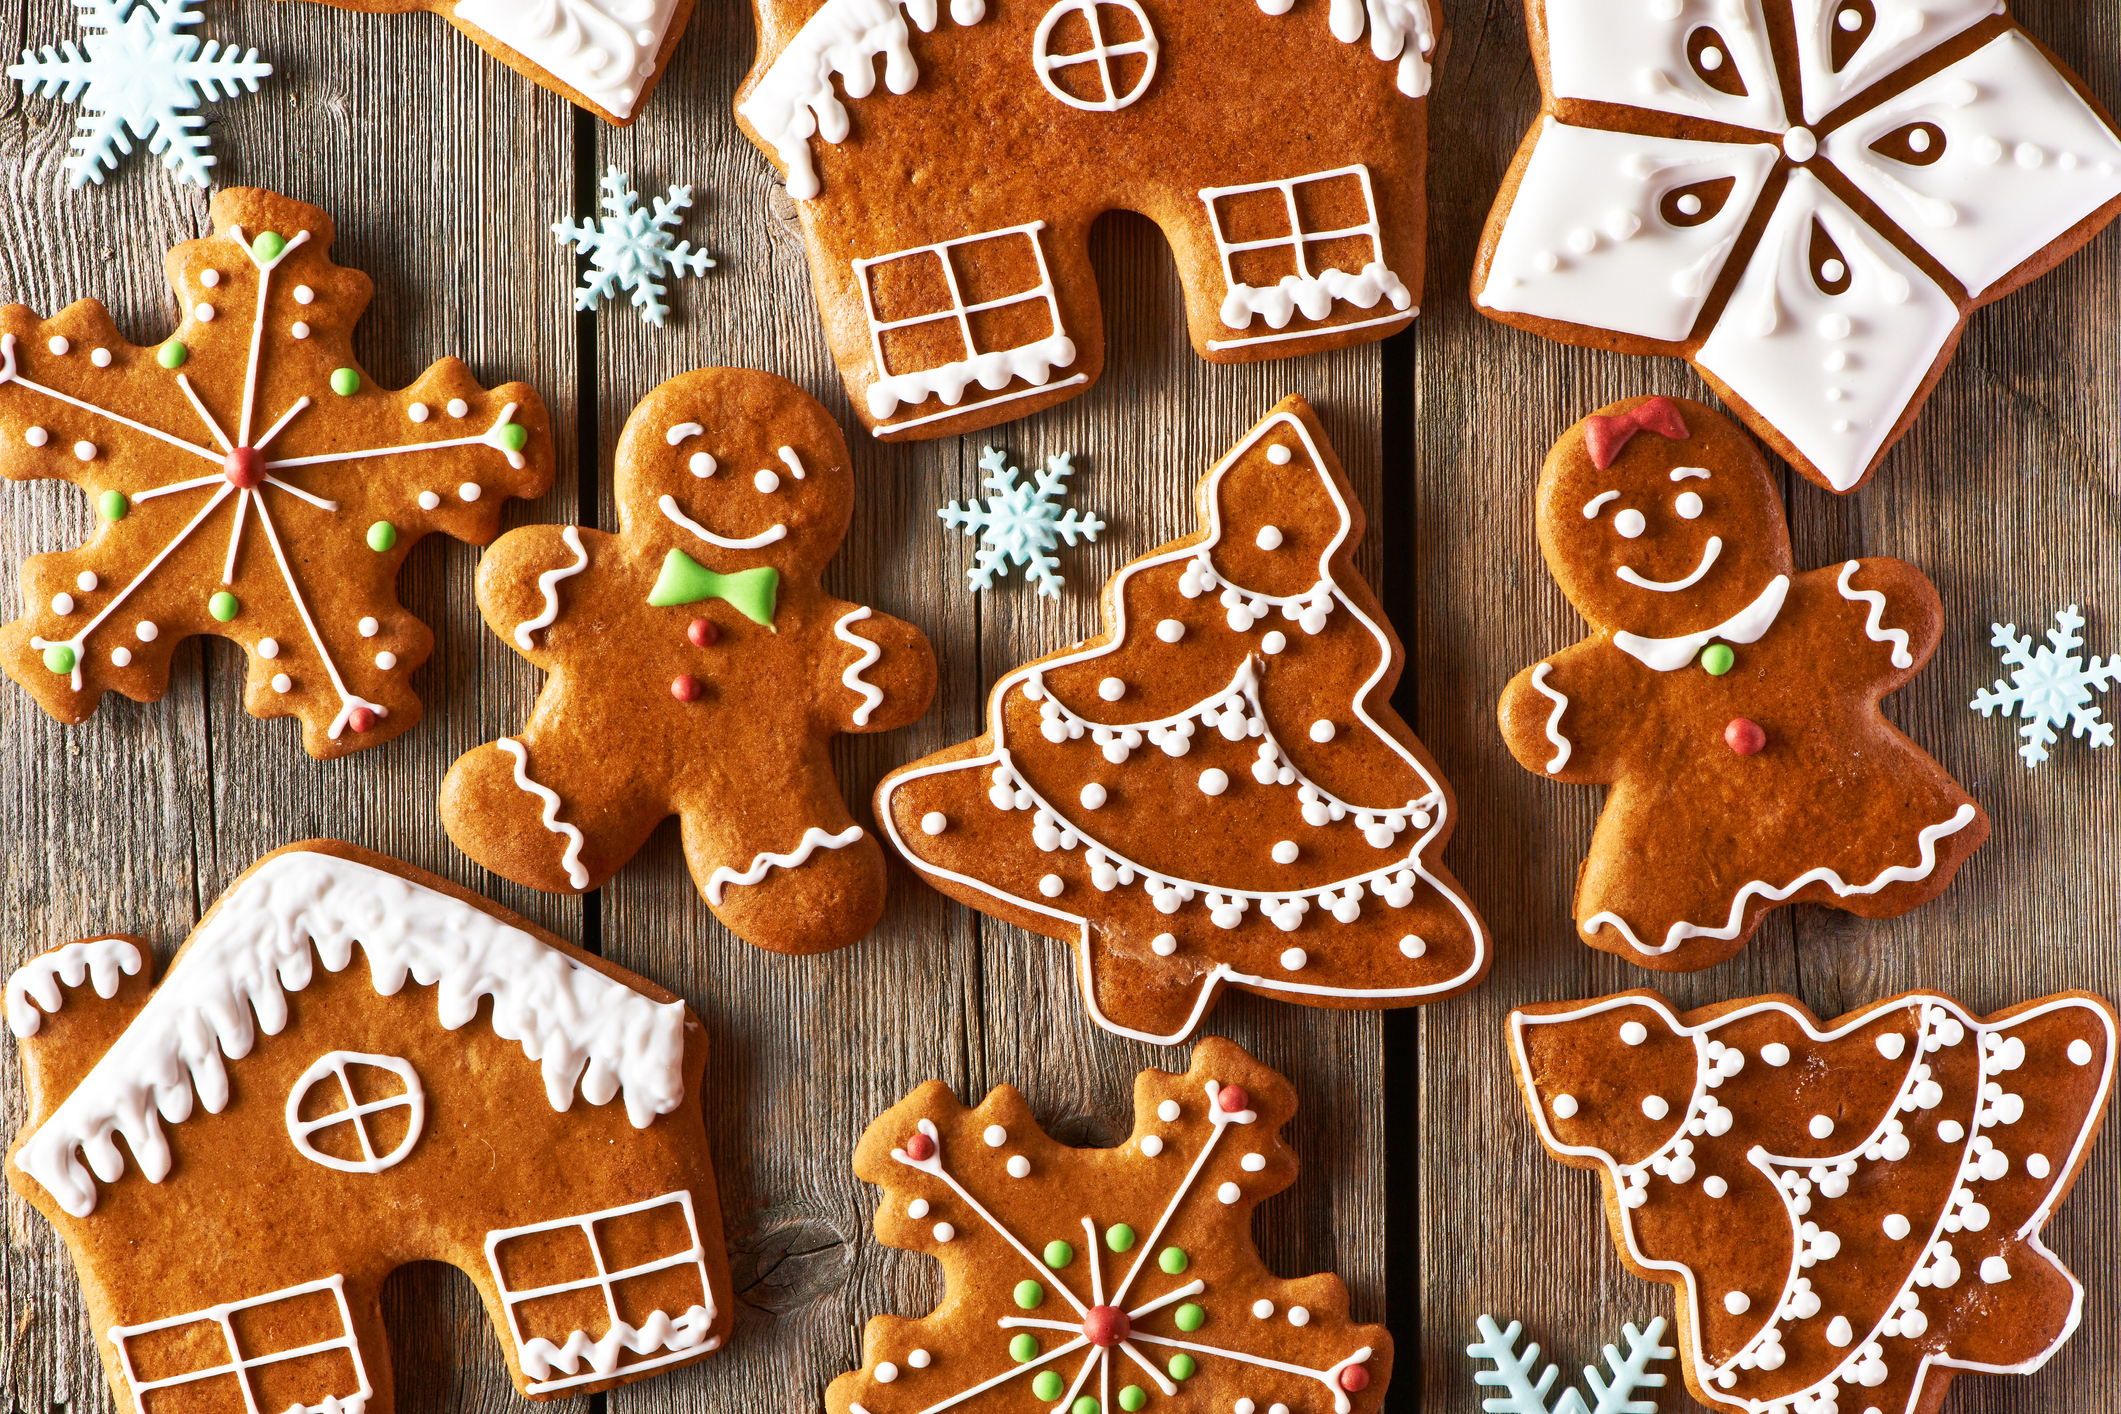 Few cookies are as festive as gingerbread men for kids and family fun